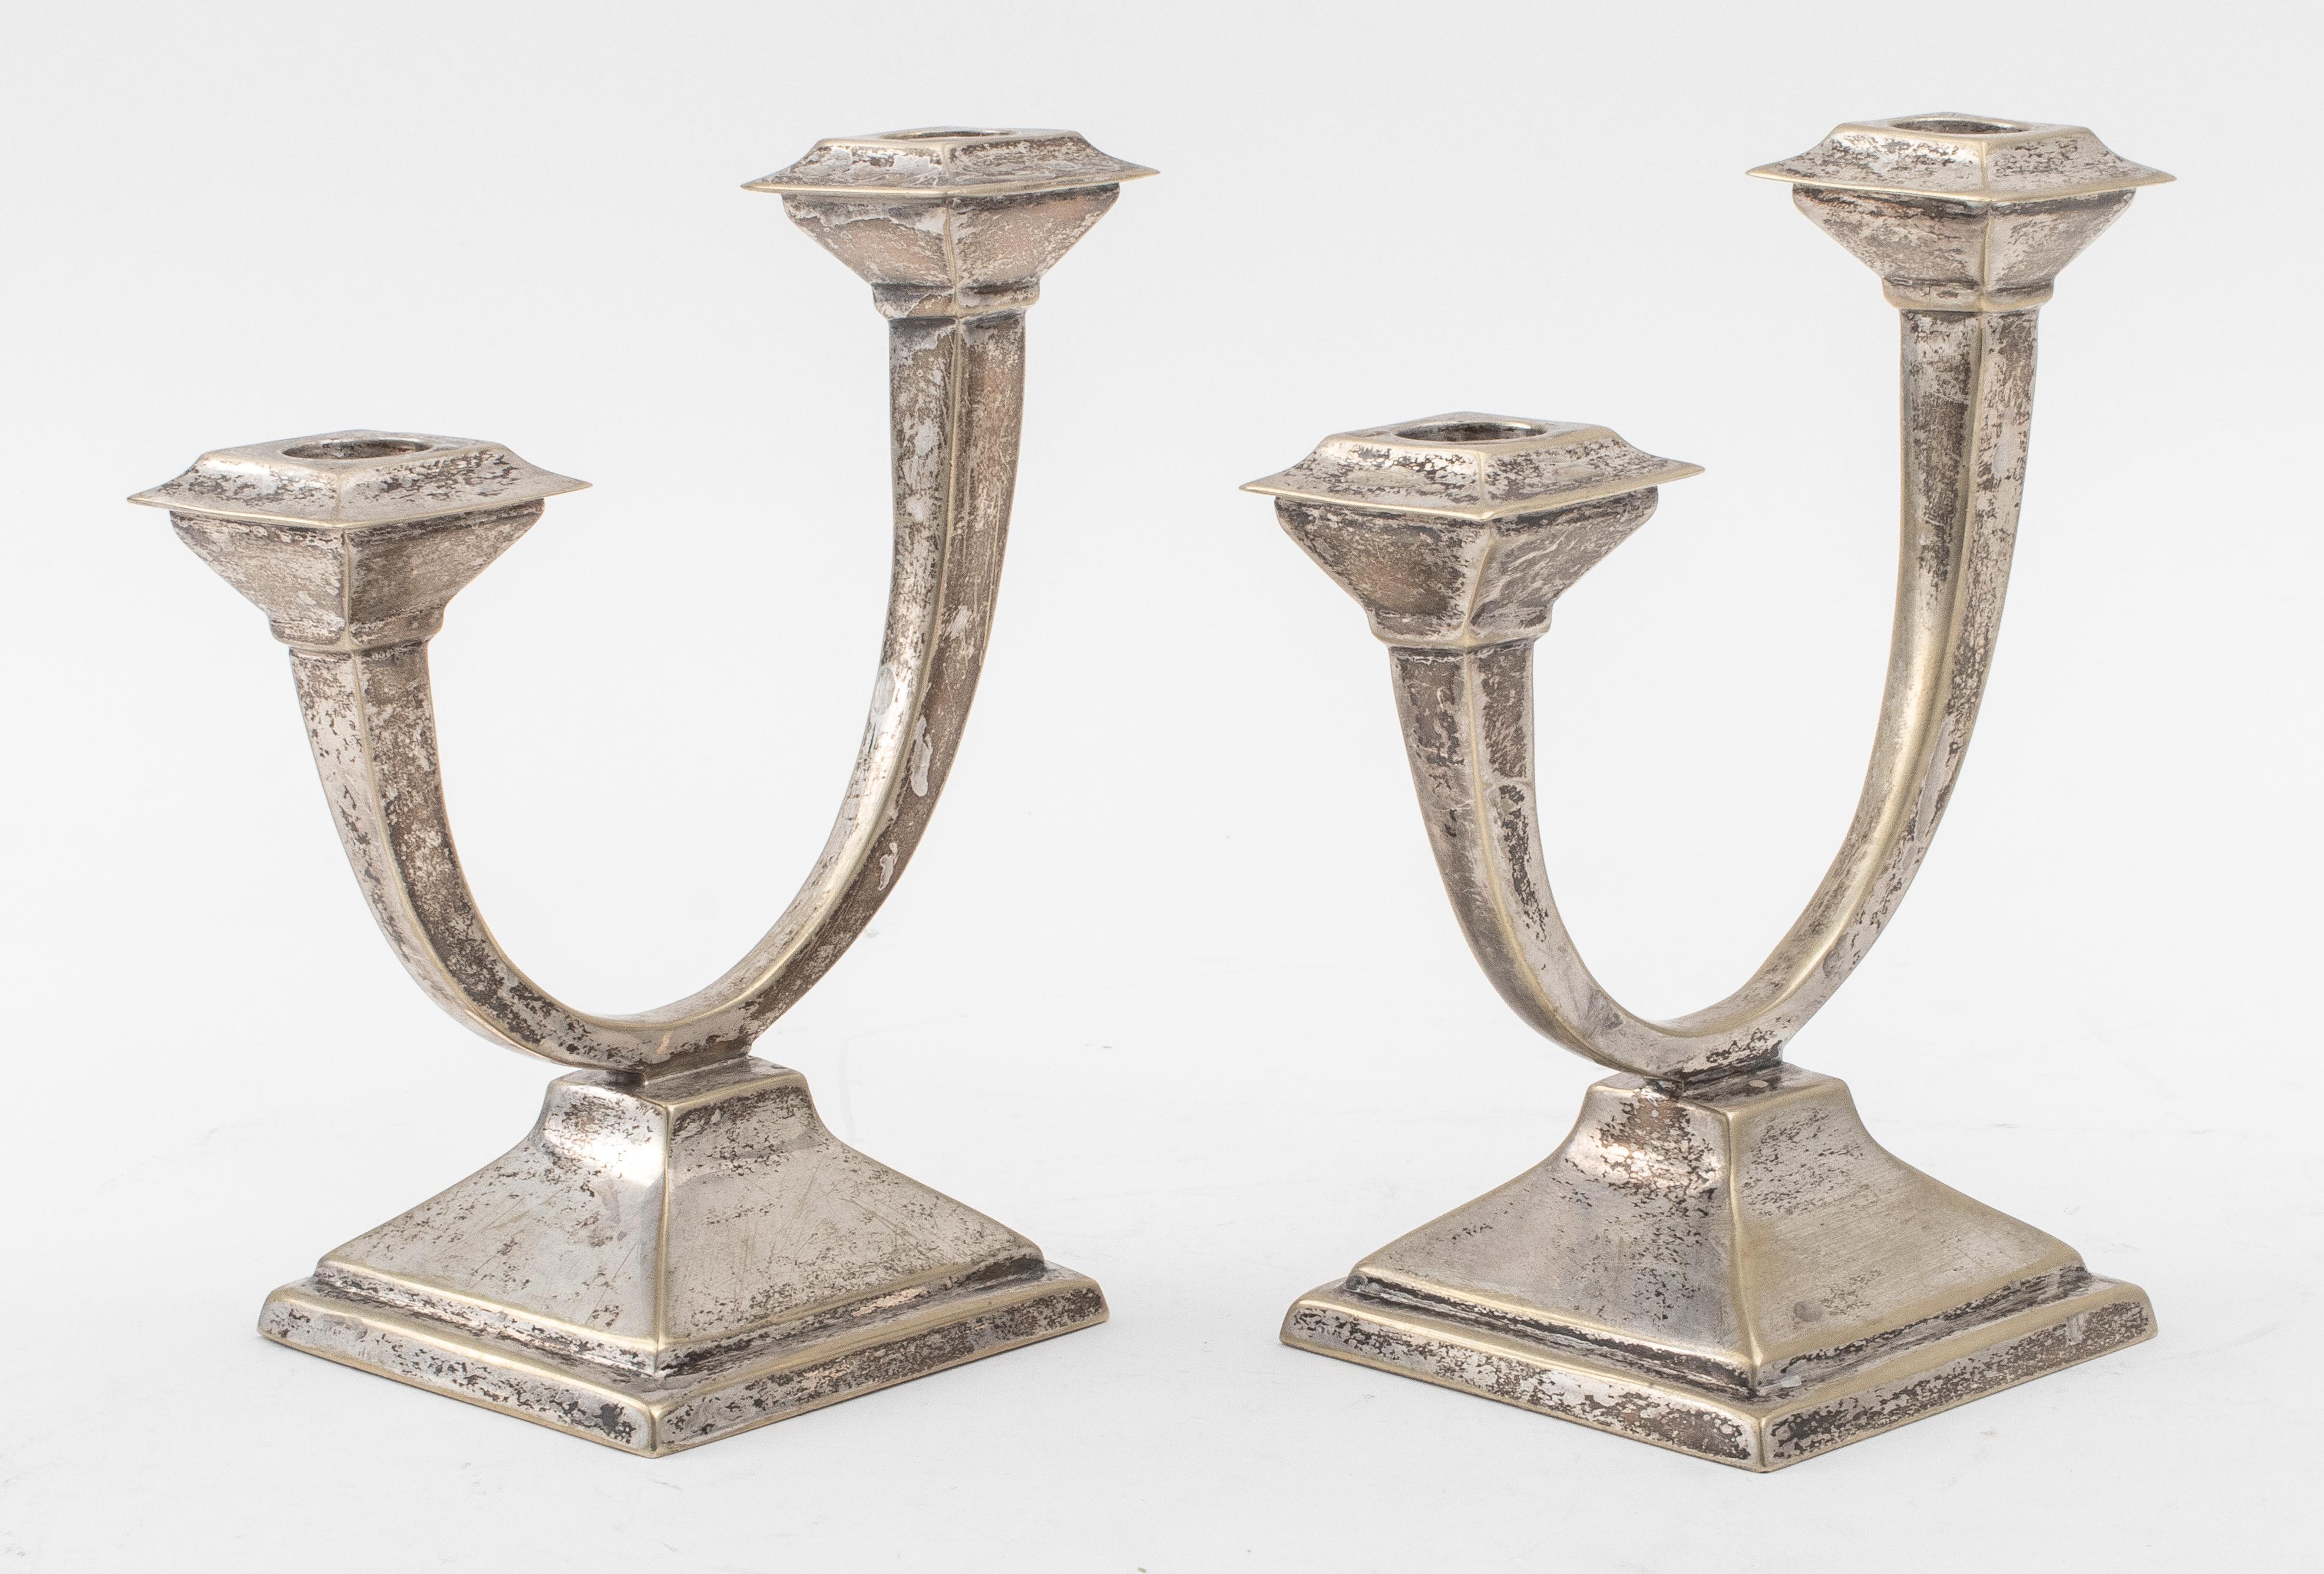 Pair of Silverplate 2 light candelabra with high low design on a square pyramidal base. 5.5